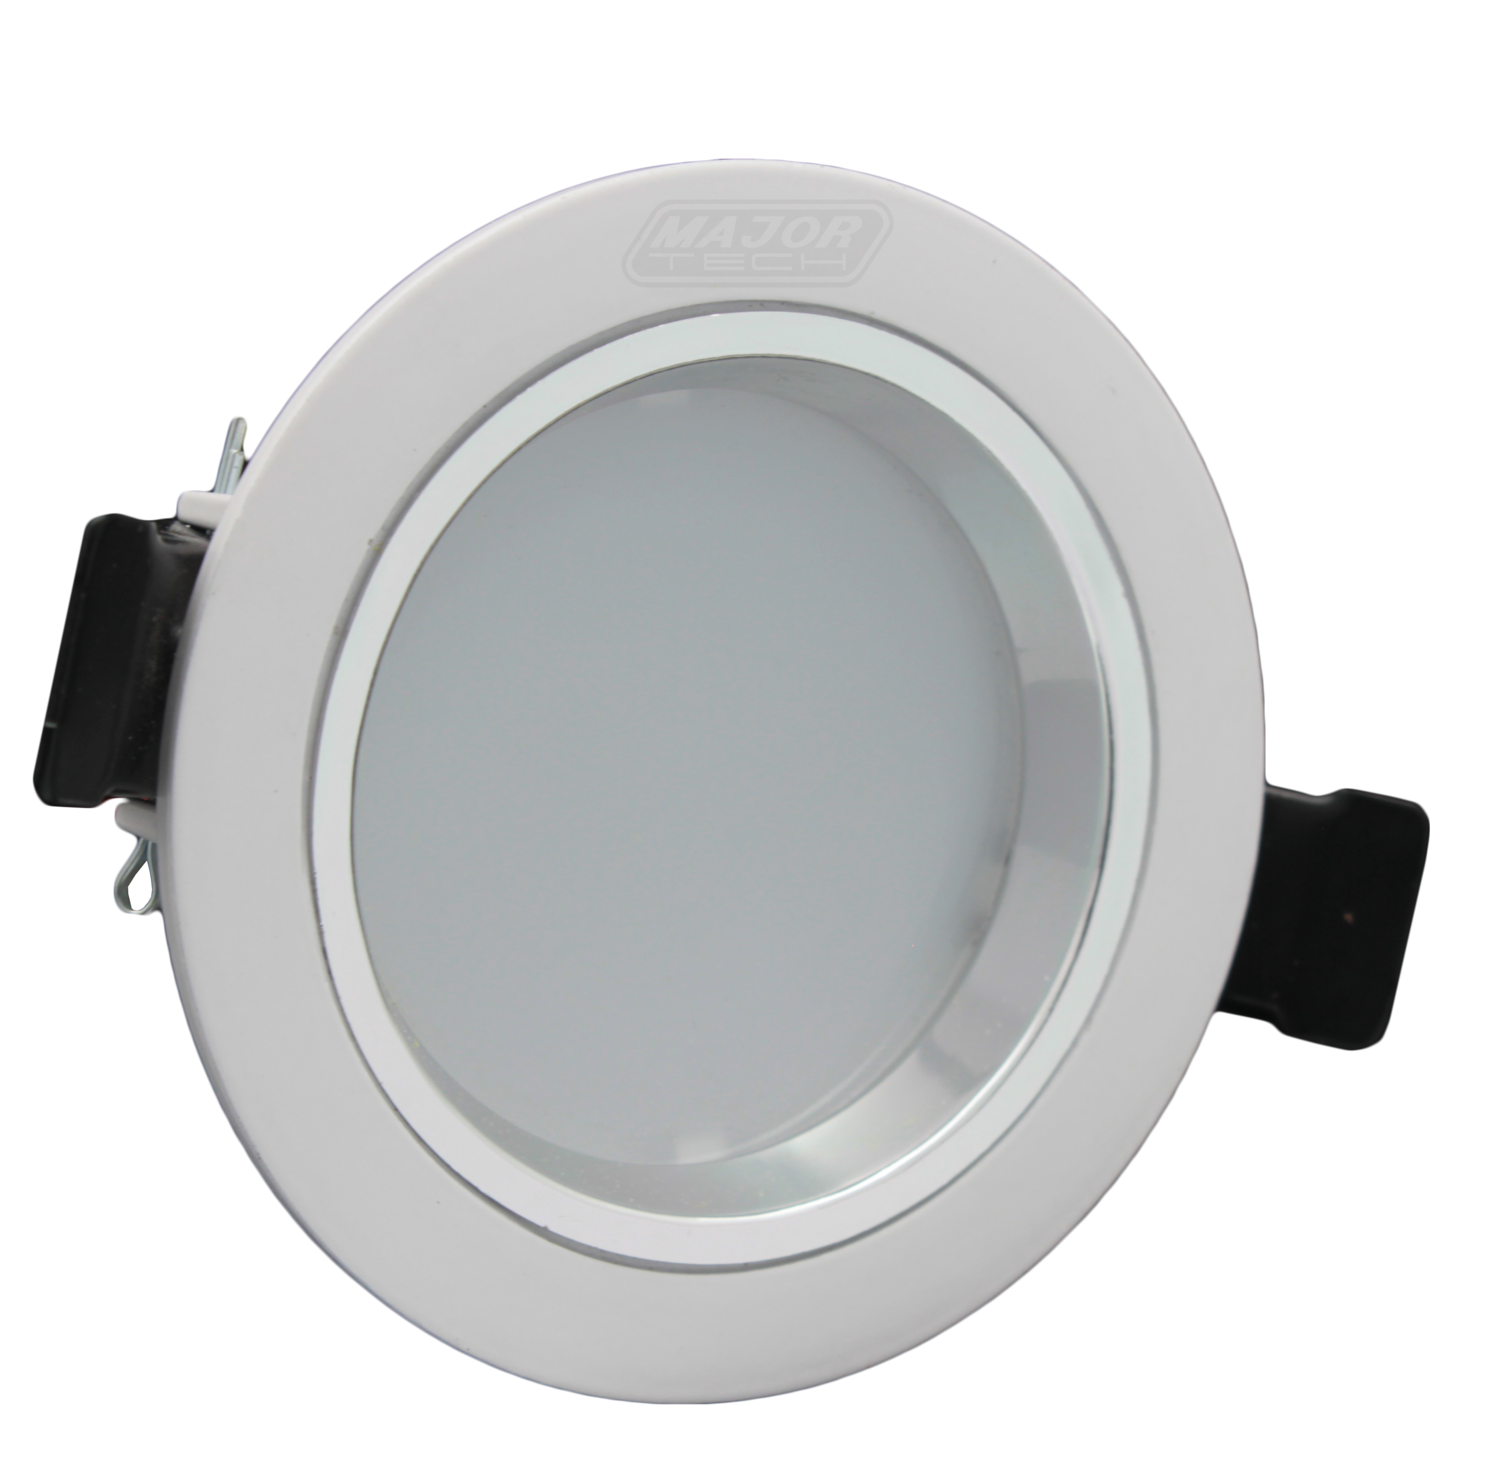 LED Ceiling Light Non-Dimmable (D3W), Variations: 3W (D3W) Cool White Non-Dimmable LED Ceiling Lights (1/Packet)